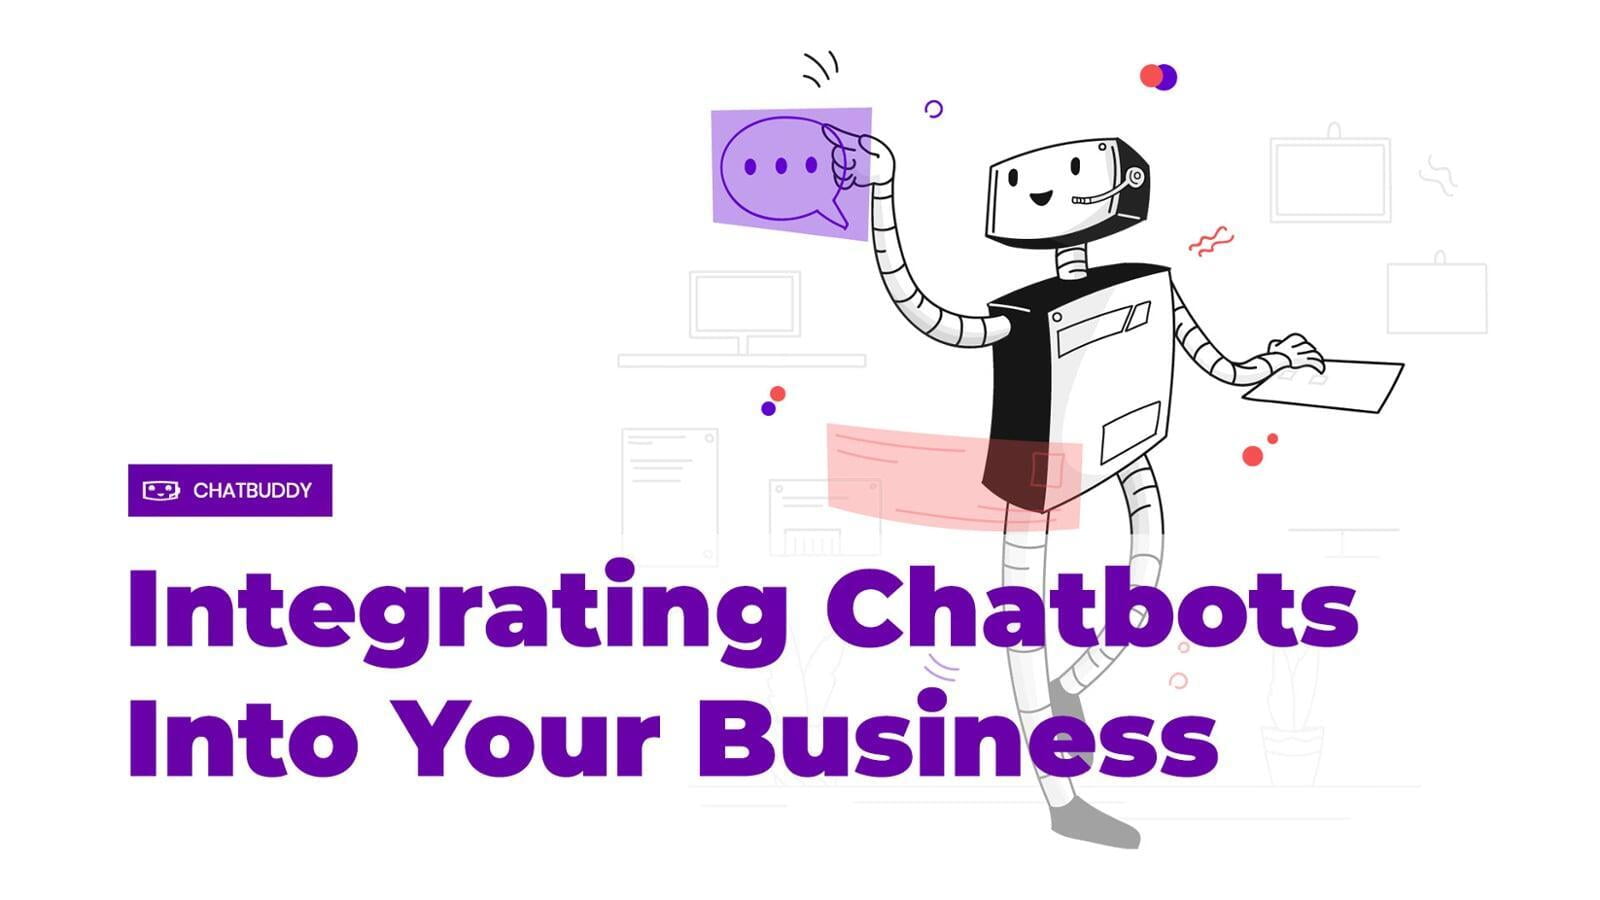 Integrating Chatbots Into Your Business